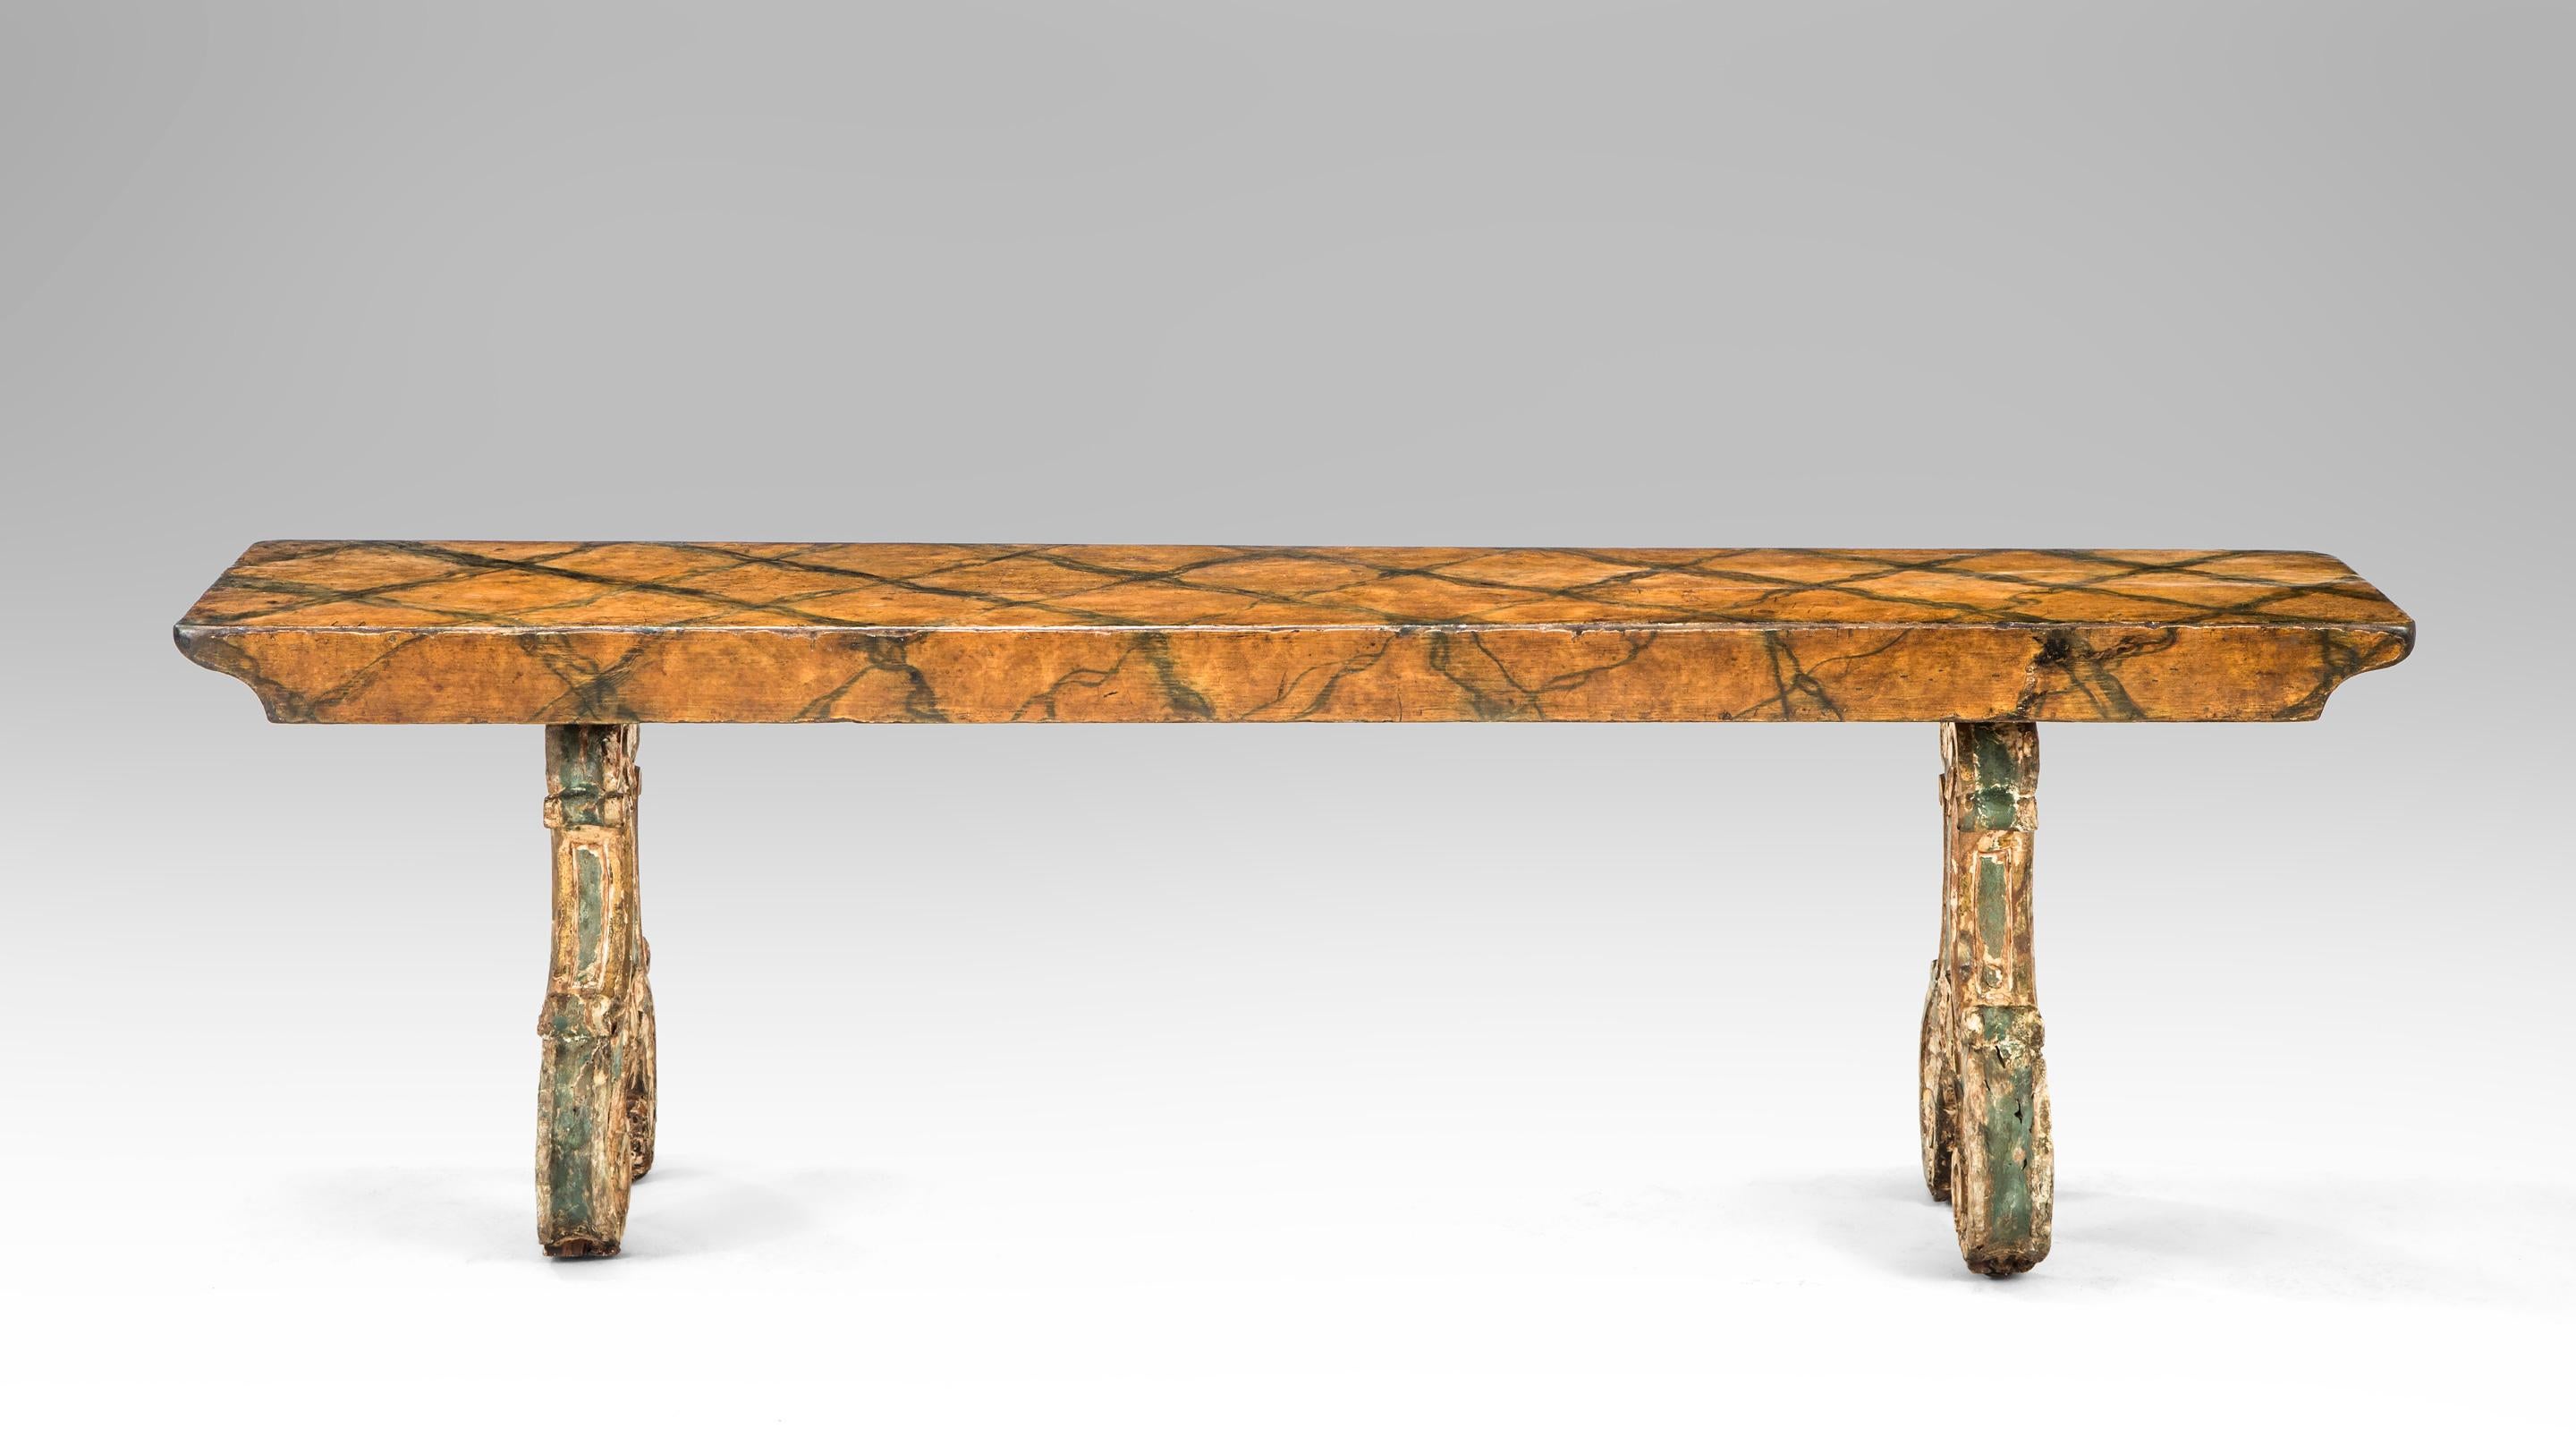 Italian carved and painted wooden bench
18th century
This alluring bench demonstrates its glorious age with an softly aged marblized top that has great character. The legs are deftly carved scrolls adorned with shells. The long, faux marble